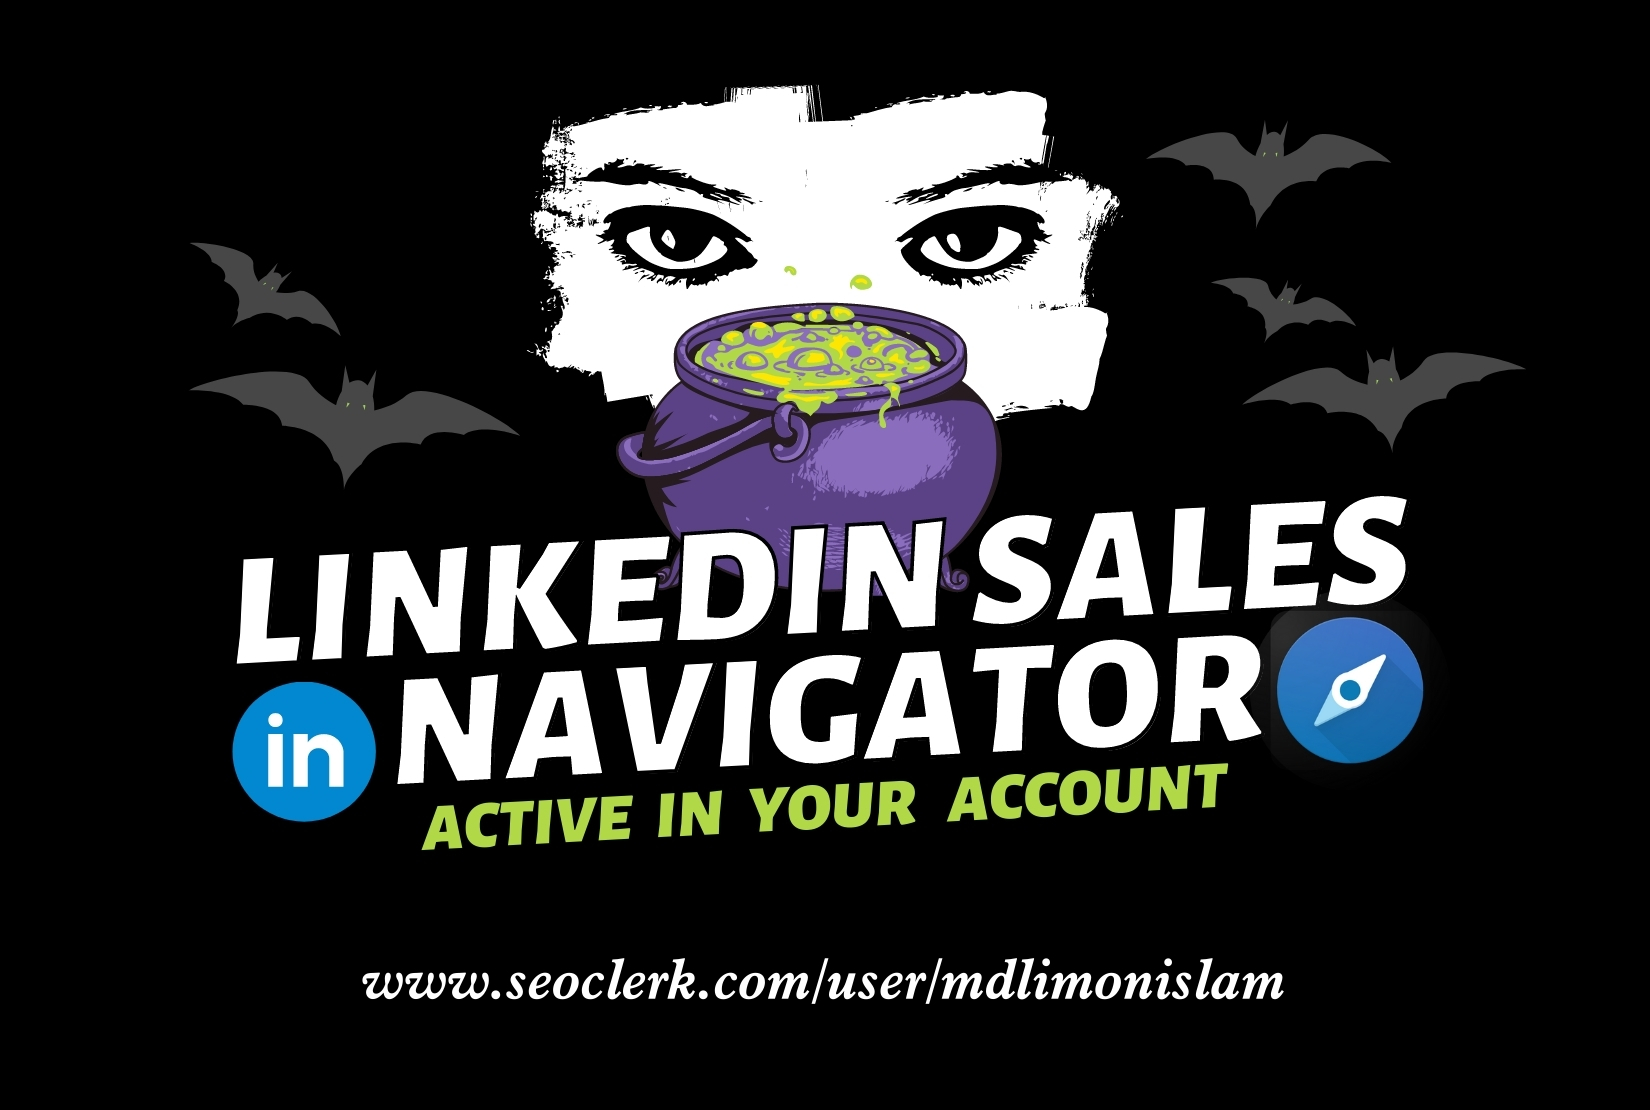 I will upgrade or active your LinkedIn sales navigator premium account for lead generation